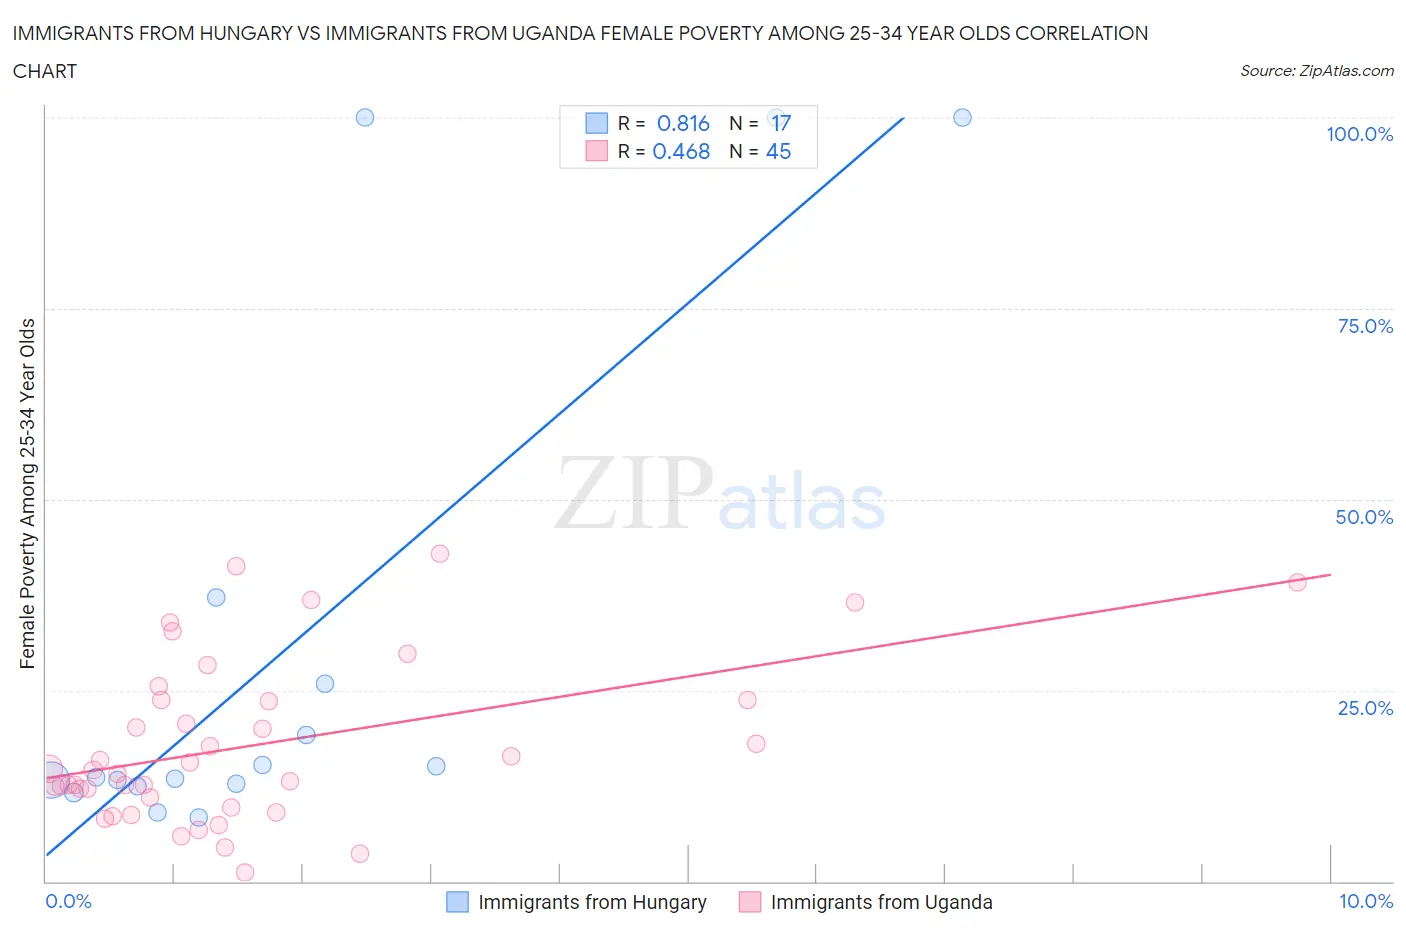 Immigrants from Hungary vs Immigrants from Uganda Female Poverty Among 25-34 Year Olds